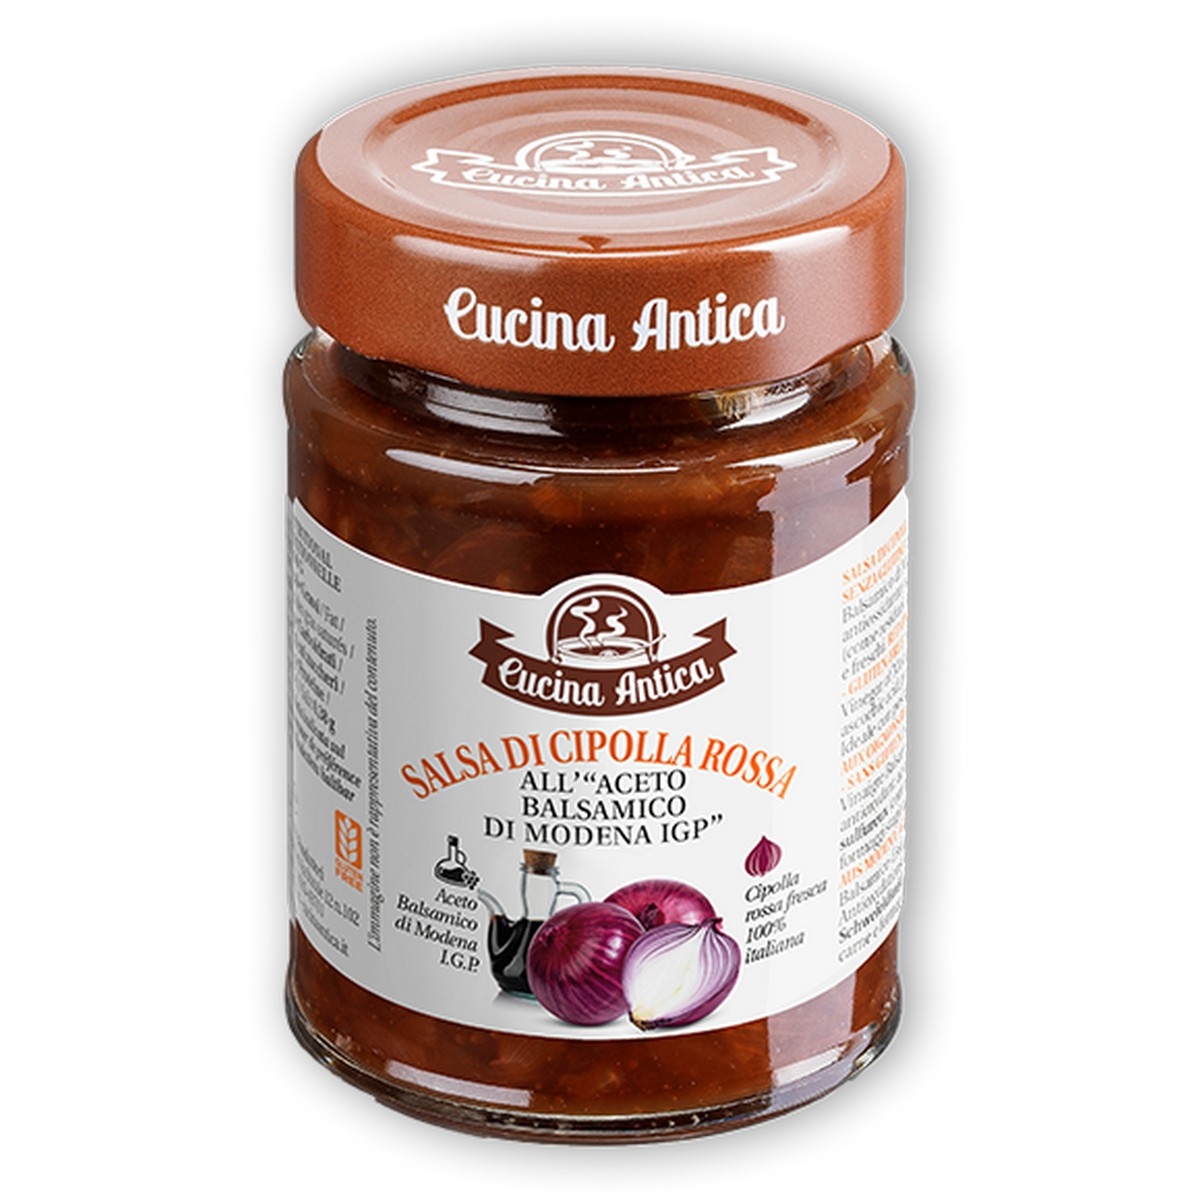 red onion sauce with balsamic vinegar of modena - 190 g